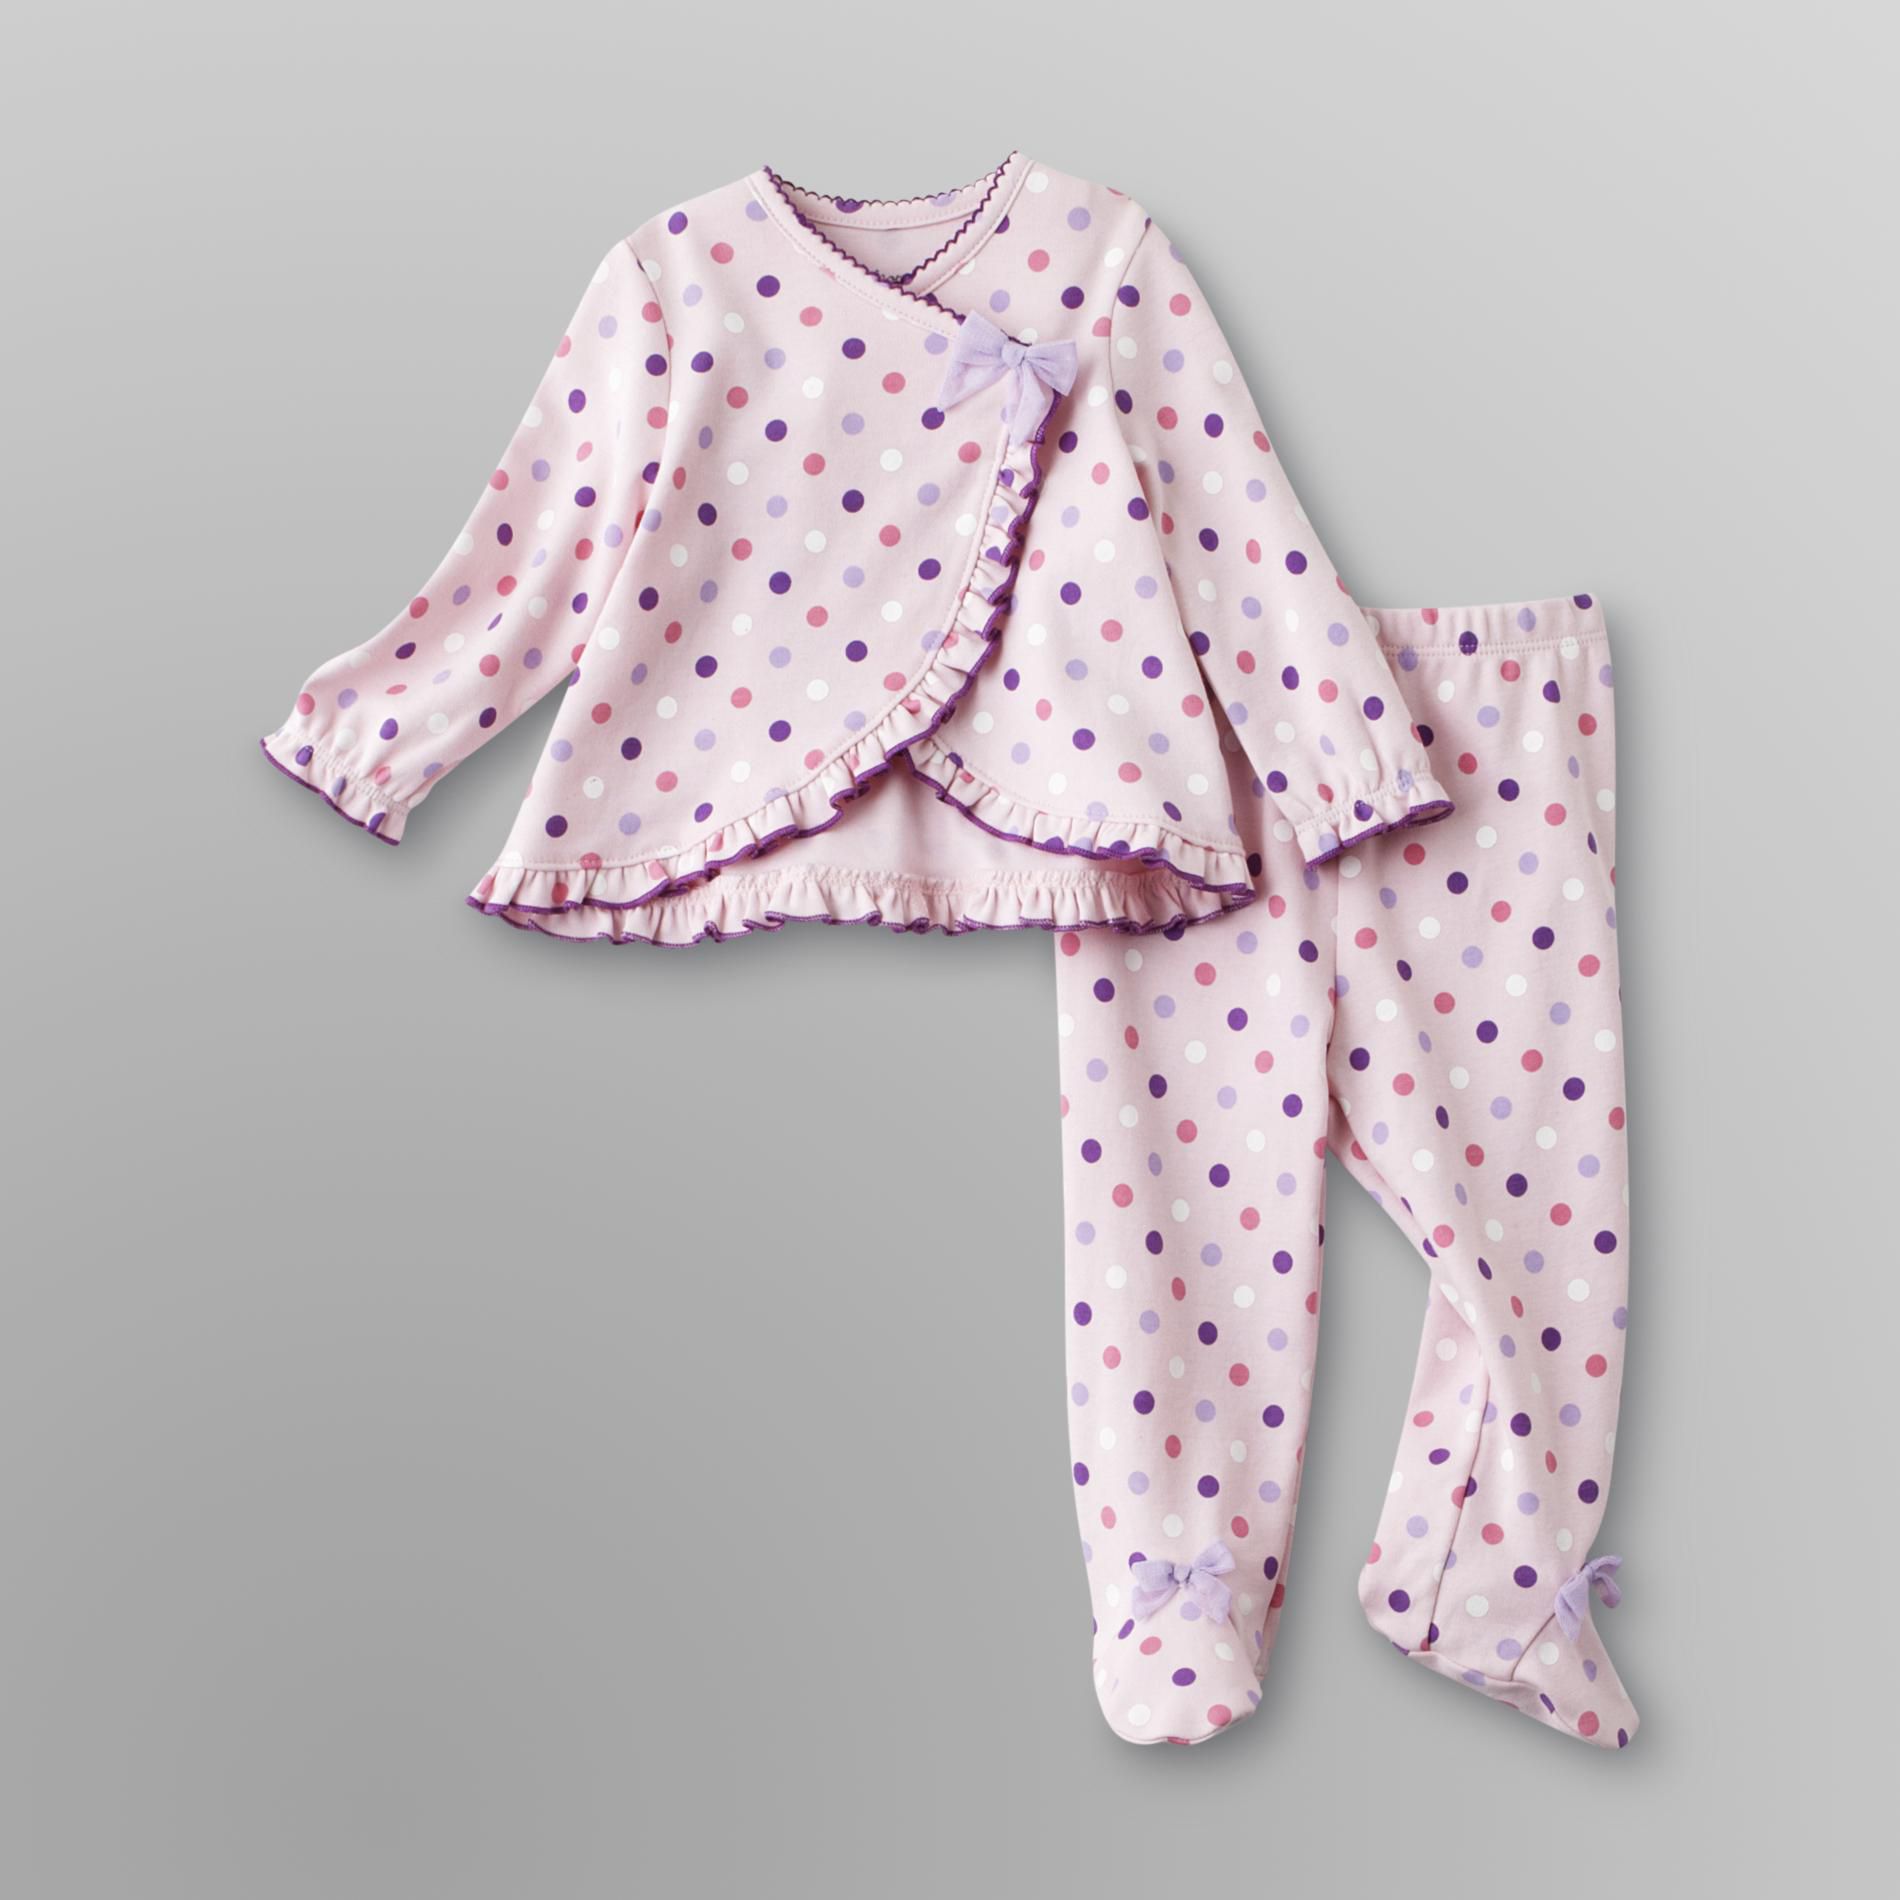 Welcome to the World Infant Girl's Polka-Dot Layette Set